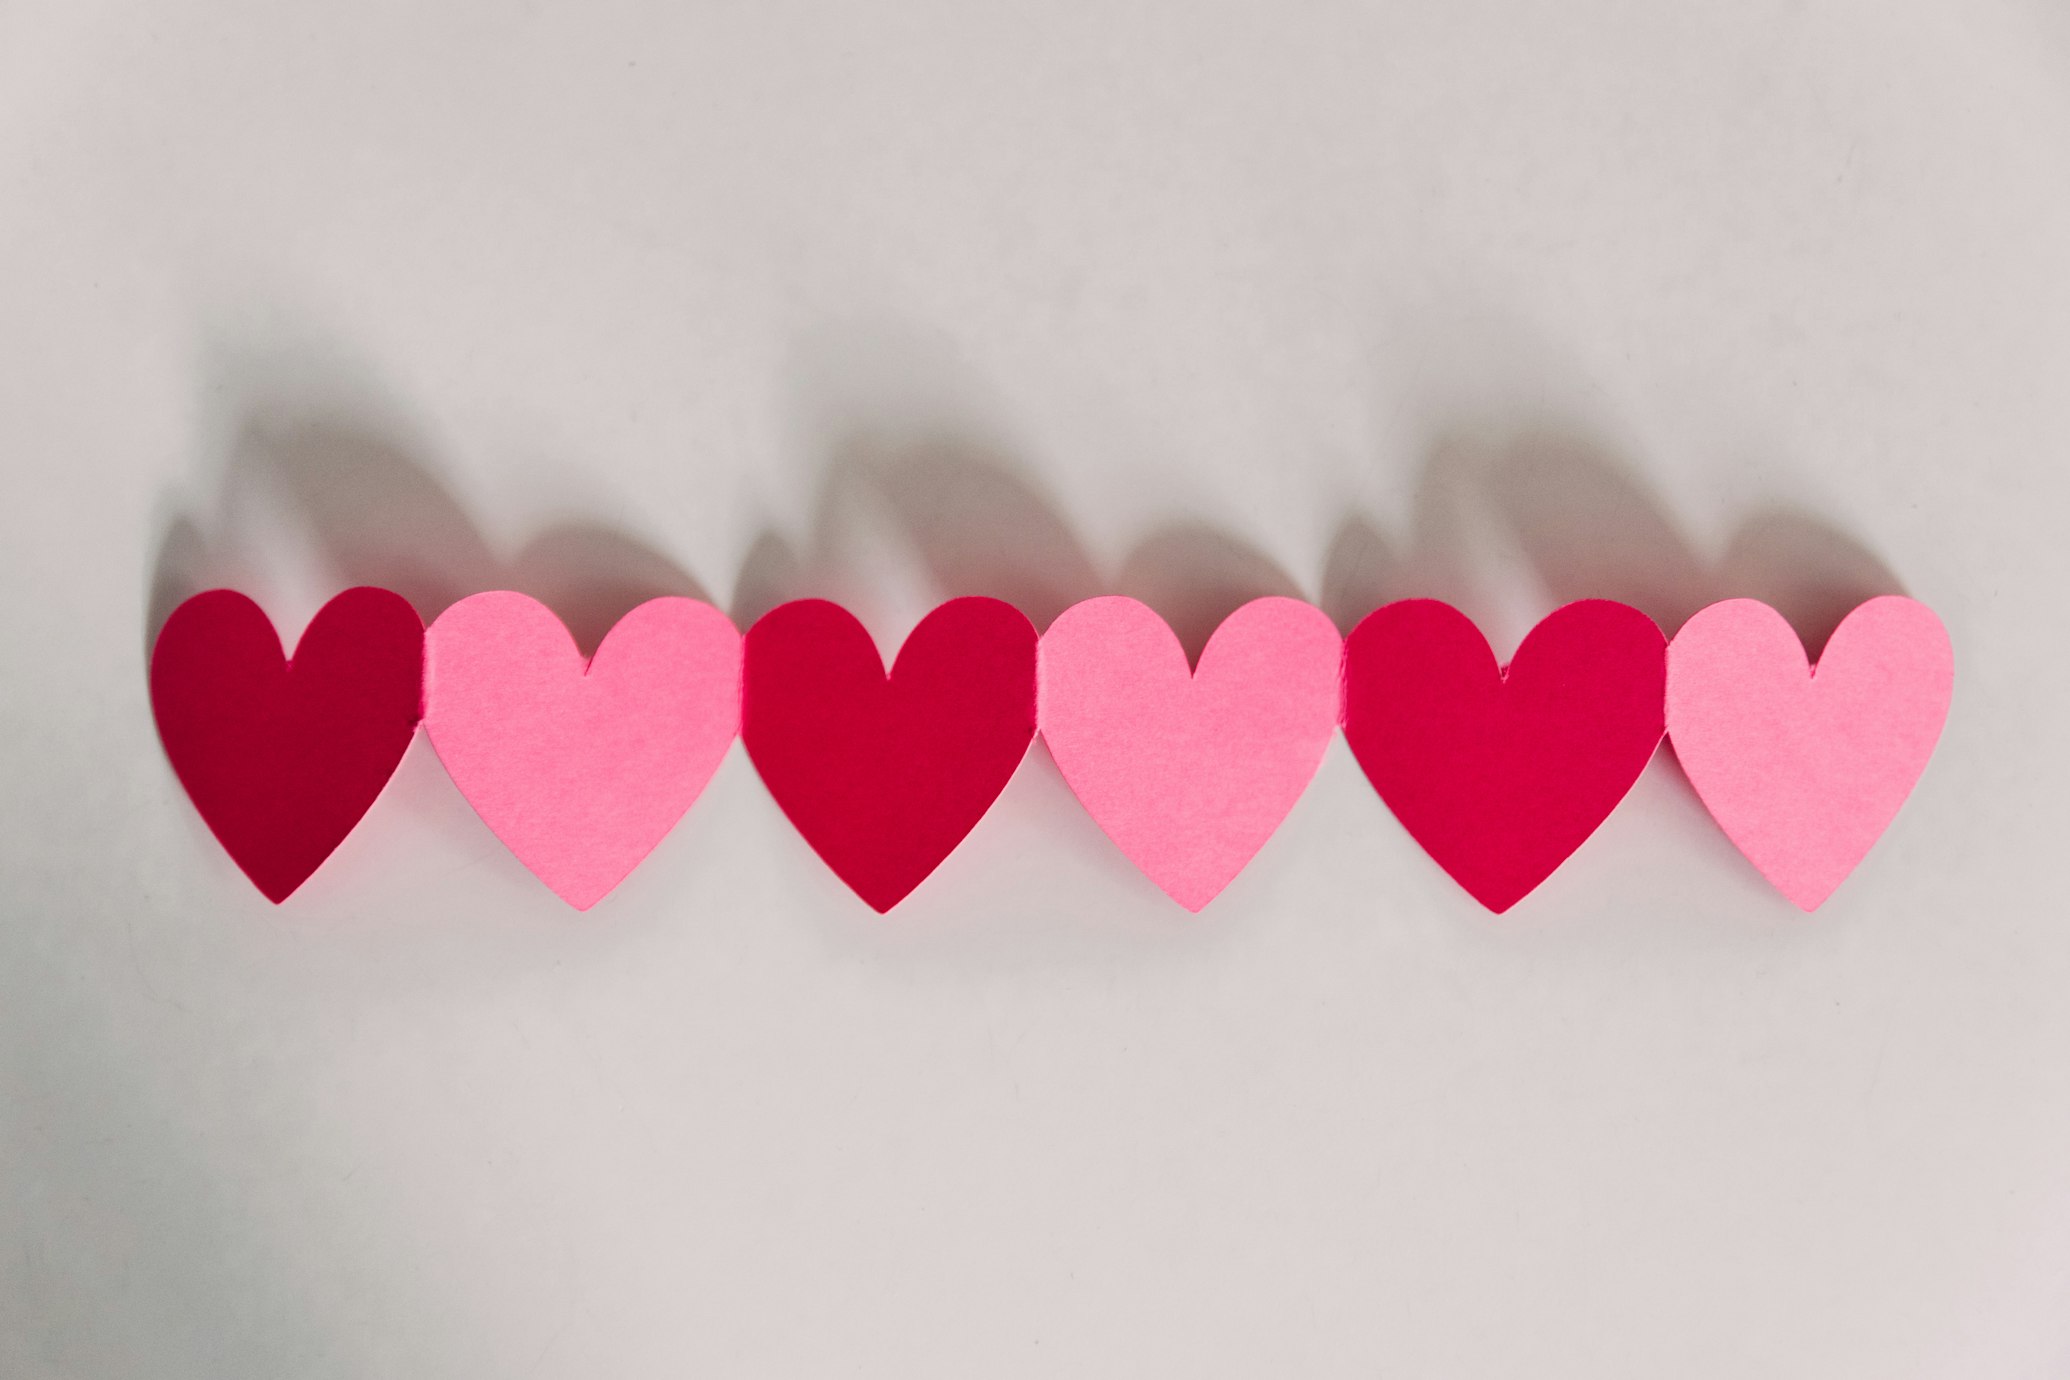 Love heart paper chain for World Kindness Day